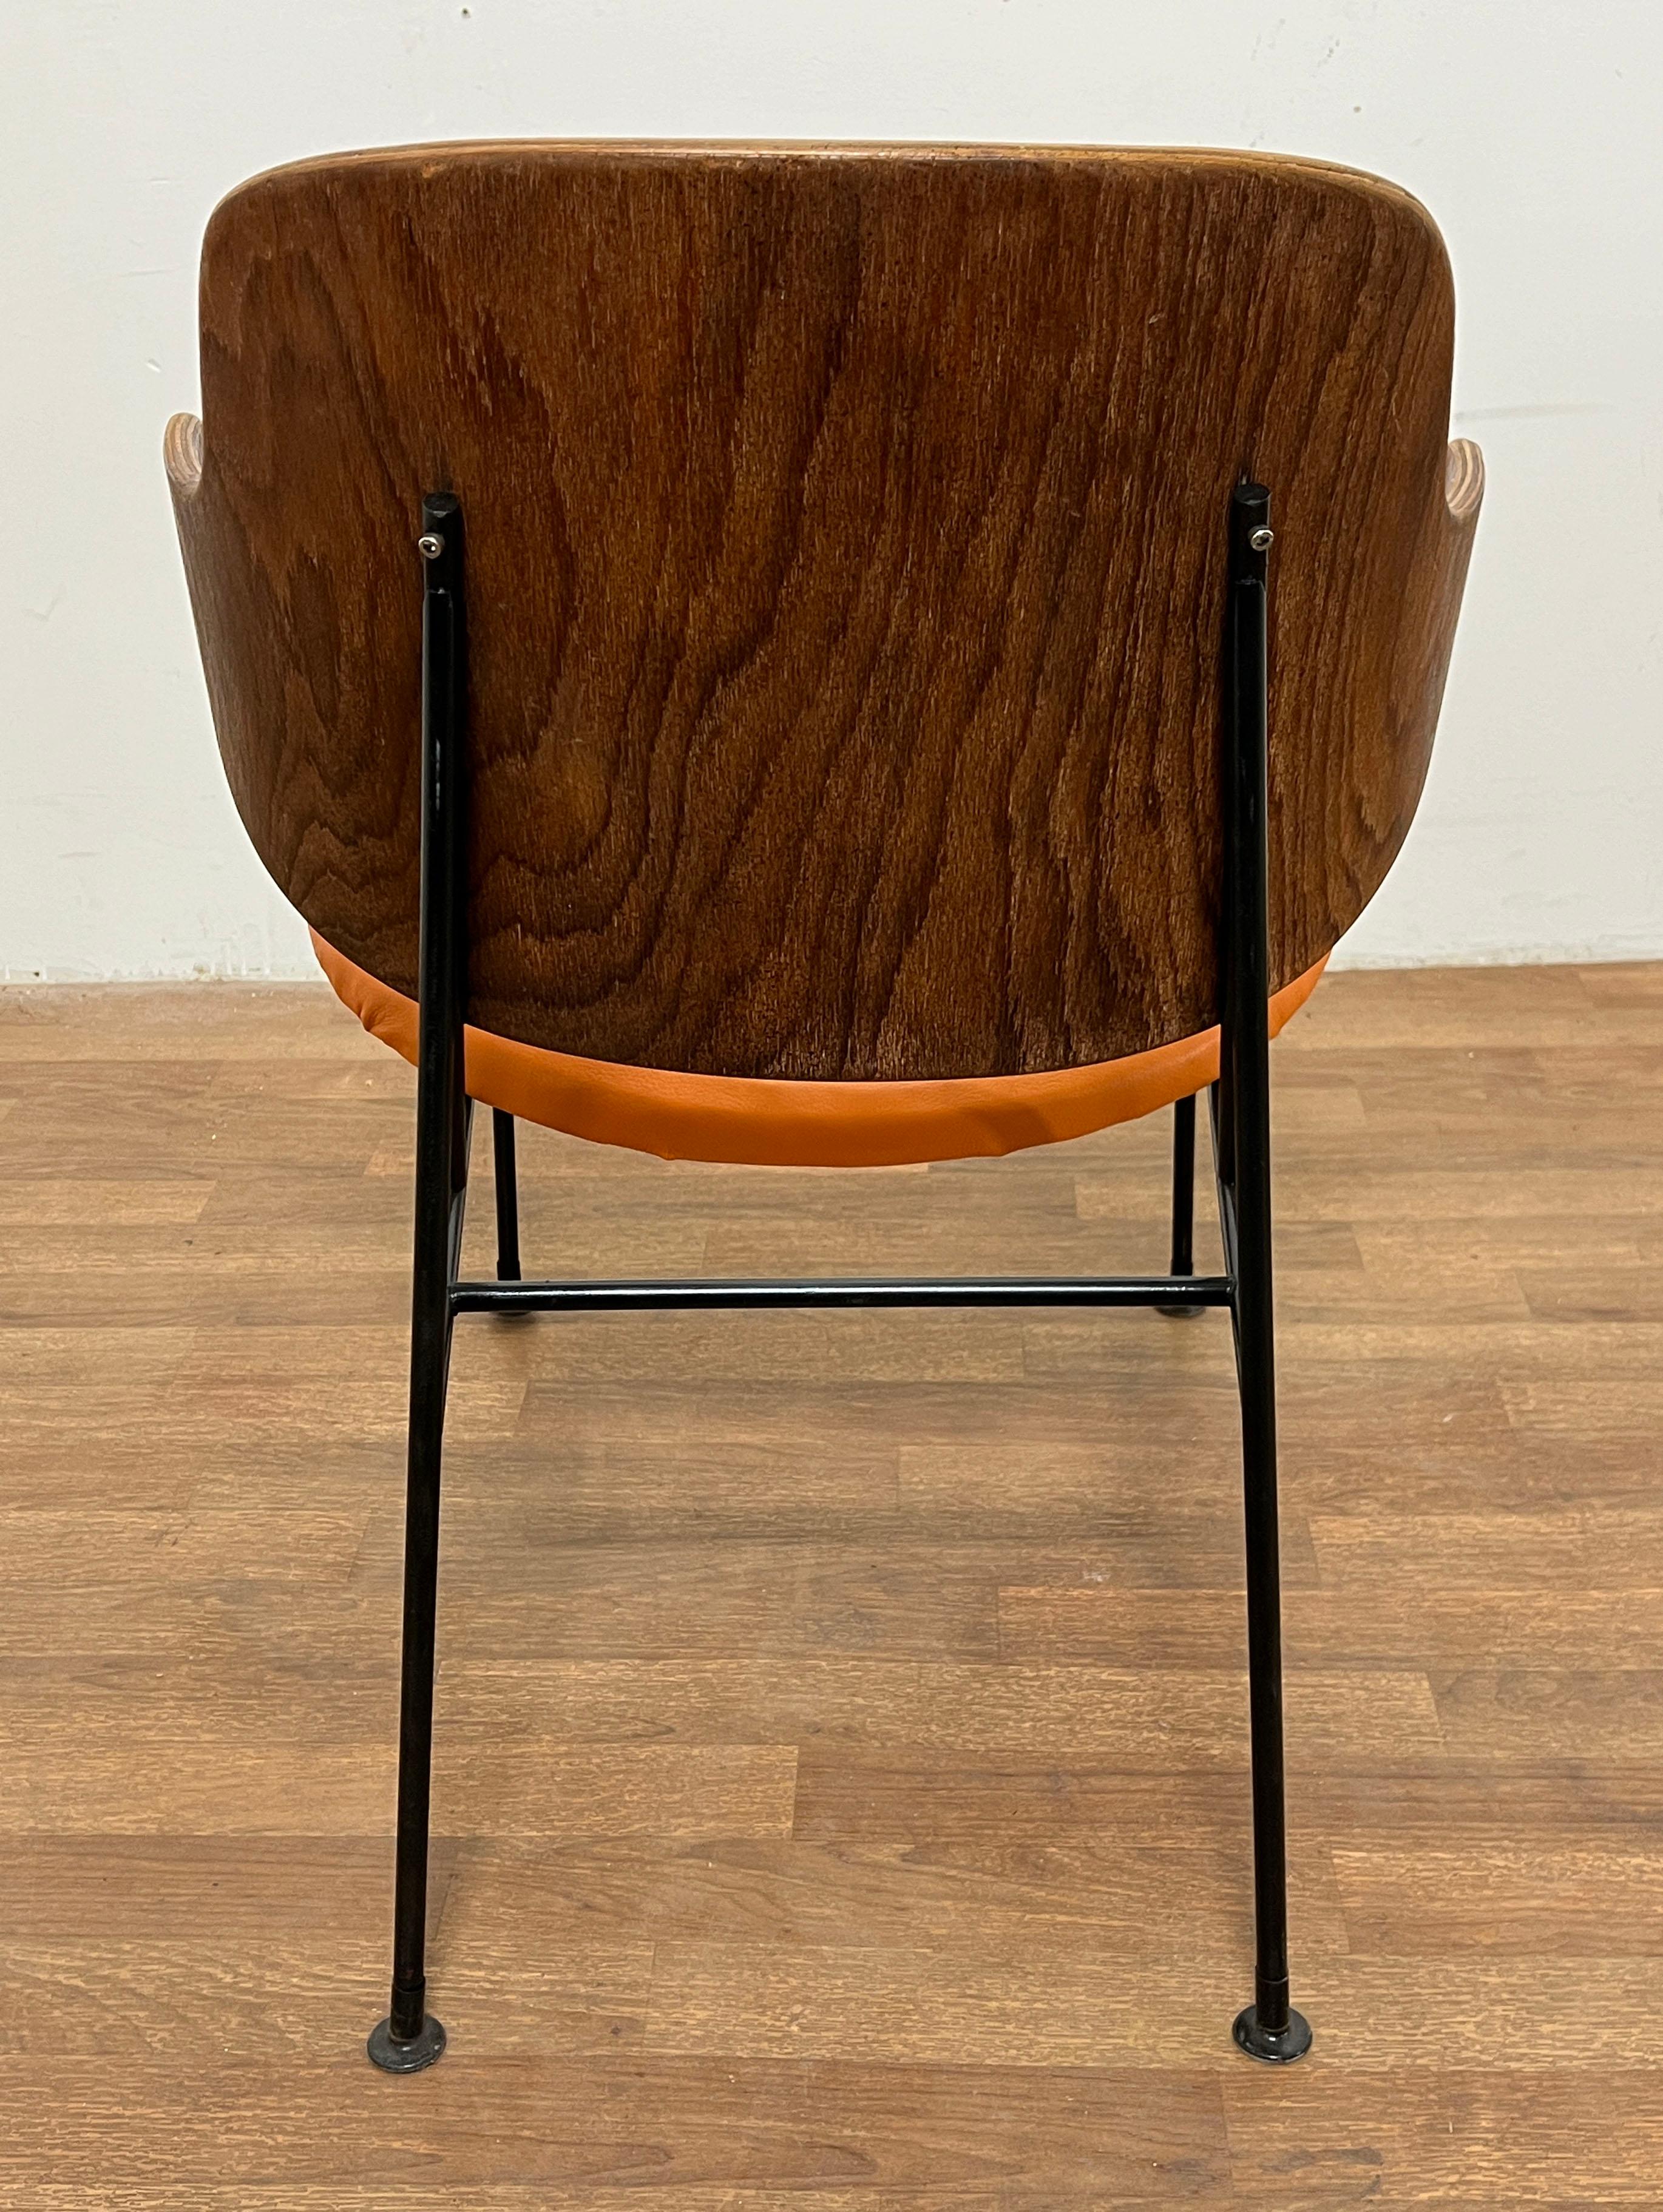 Ib Kofod-Larsen Danish Bentwood and Leather Penguin Chair Circa 1960s For Sale 3